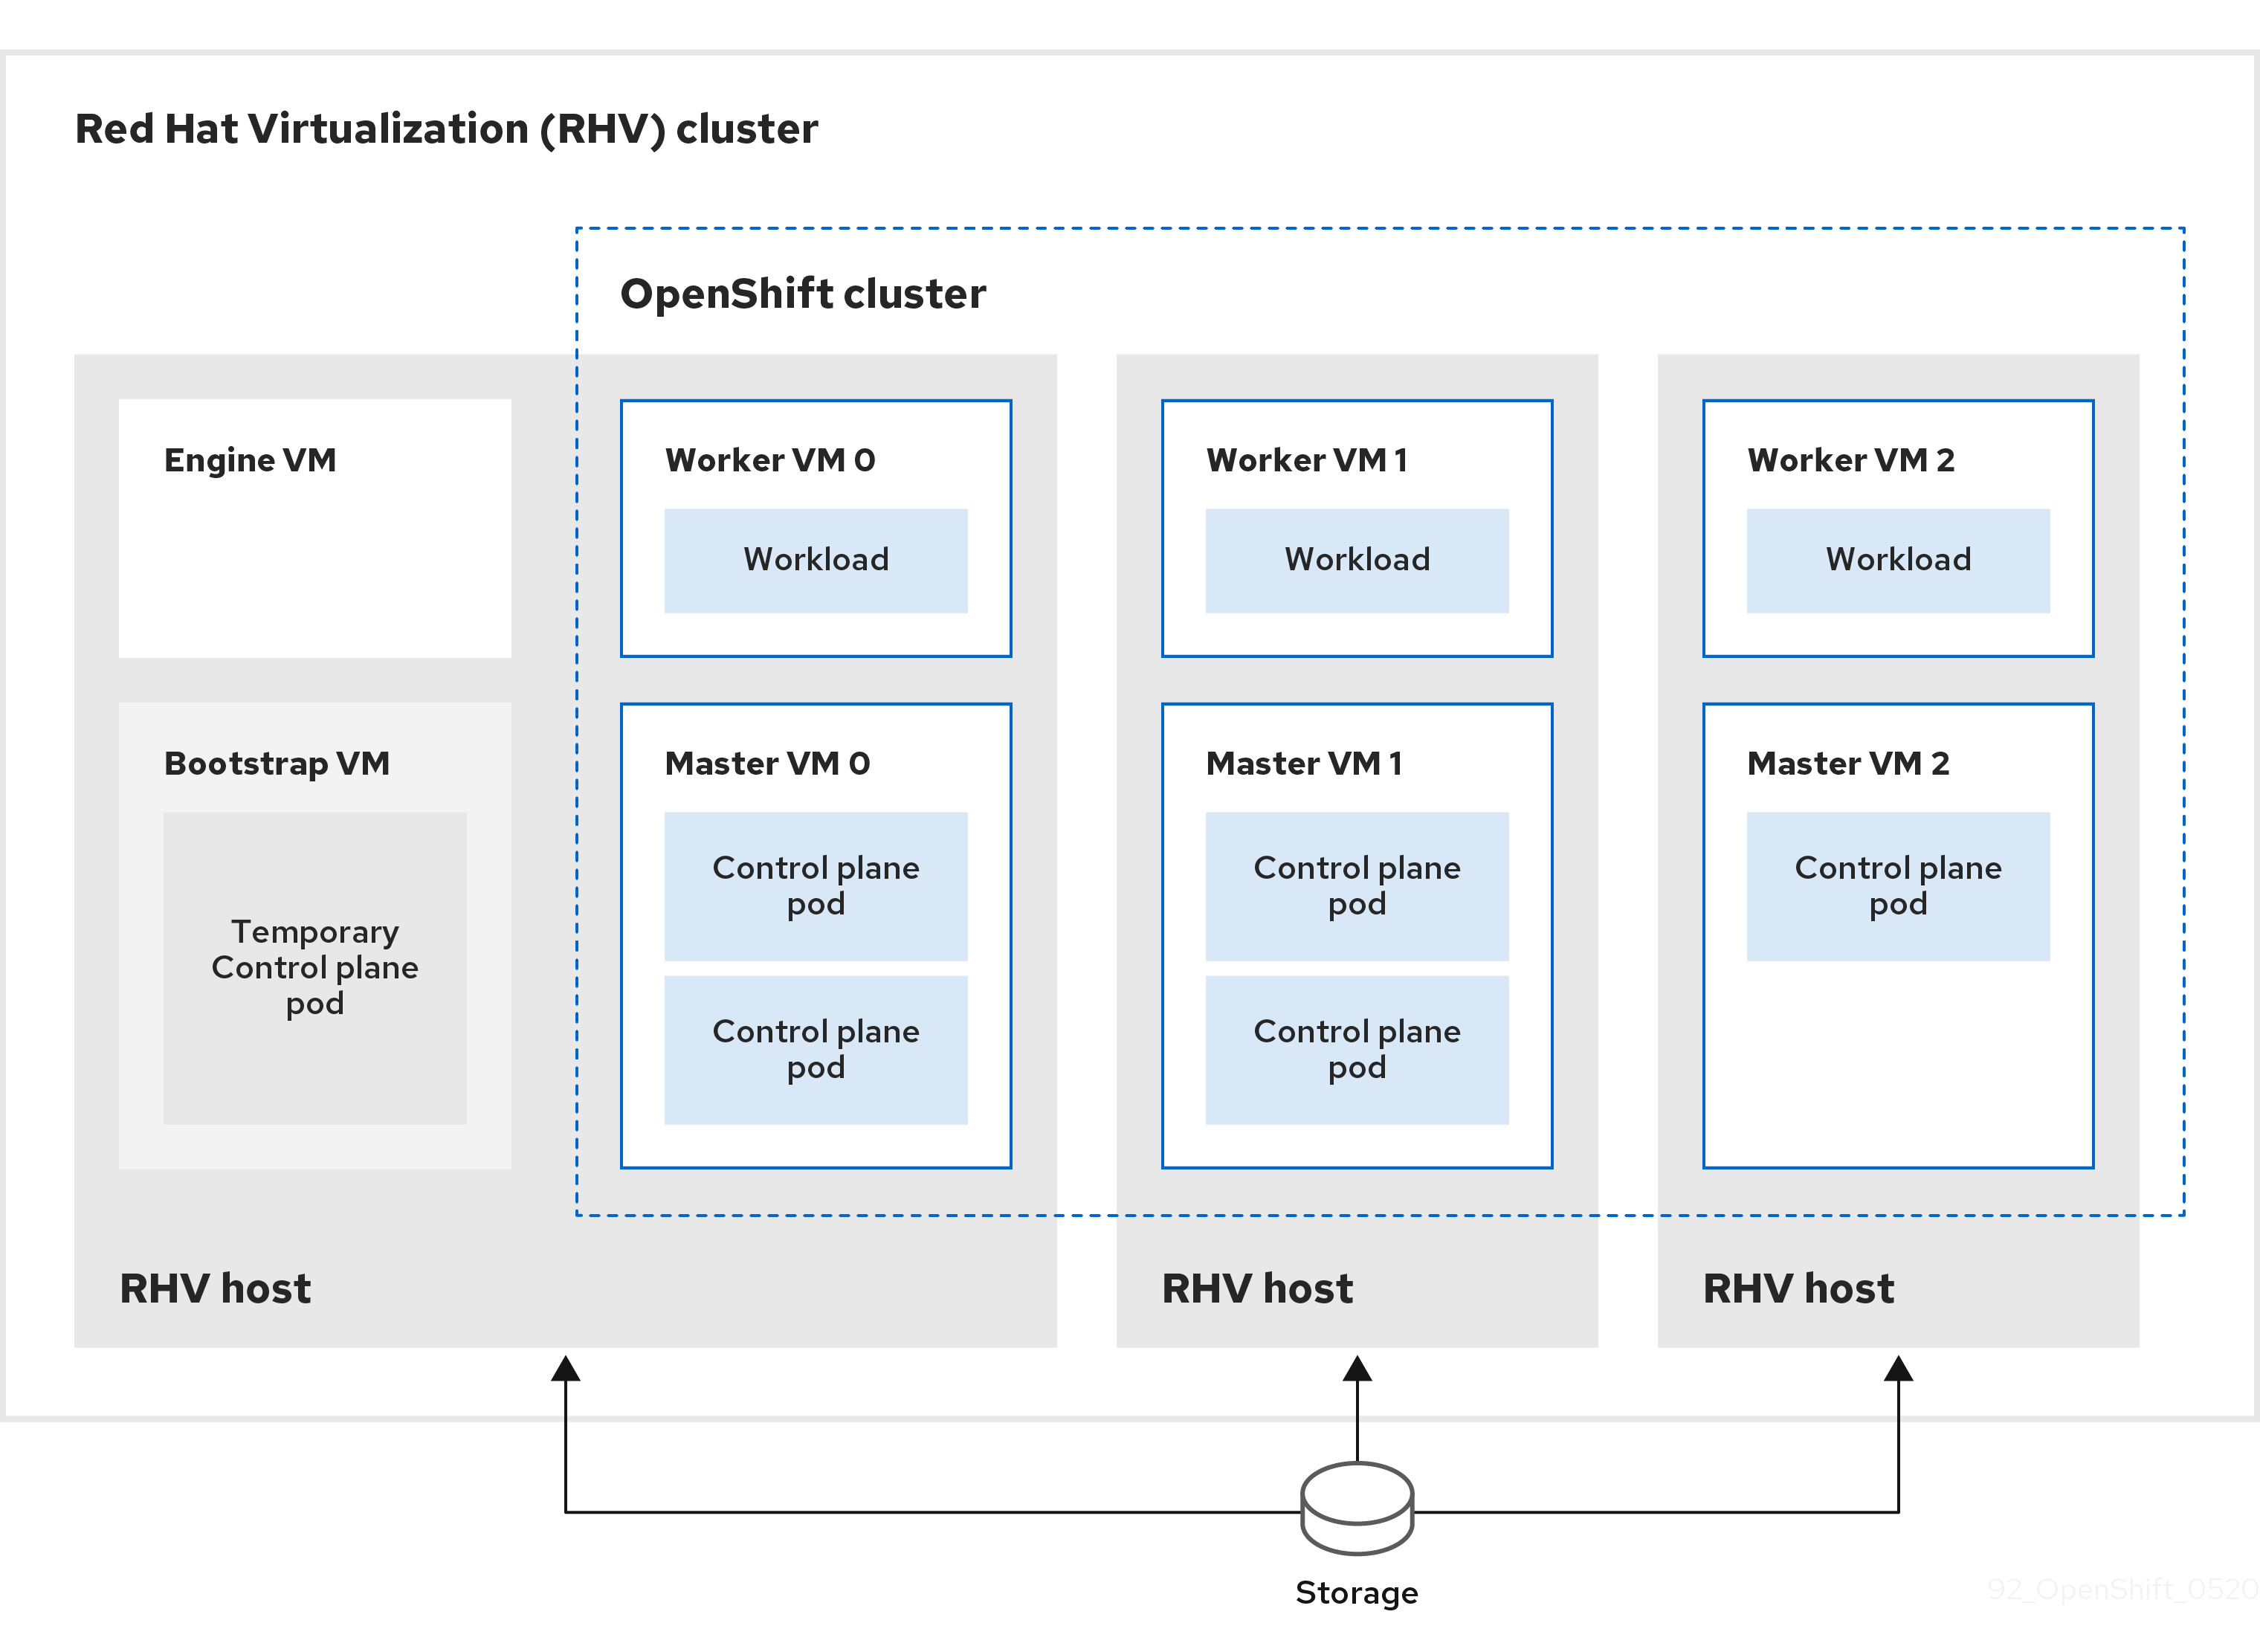 Diagram of an OpenShift Container Platform cluster on a RHV cluster